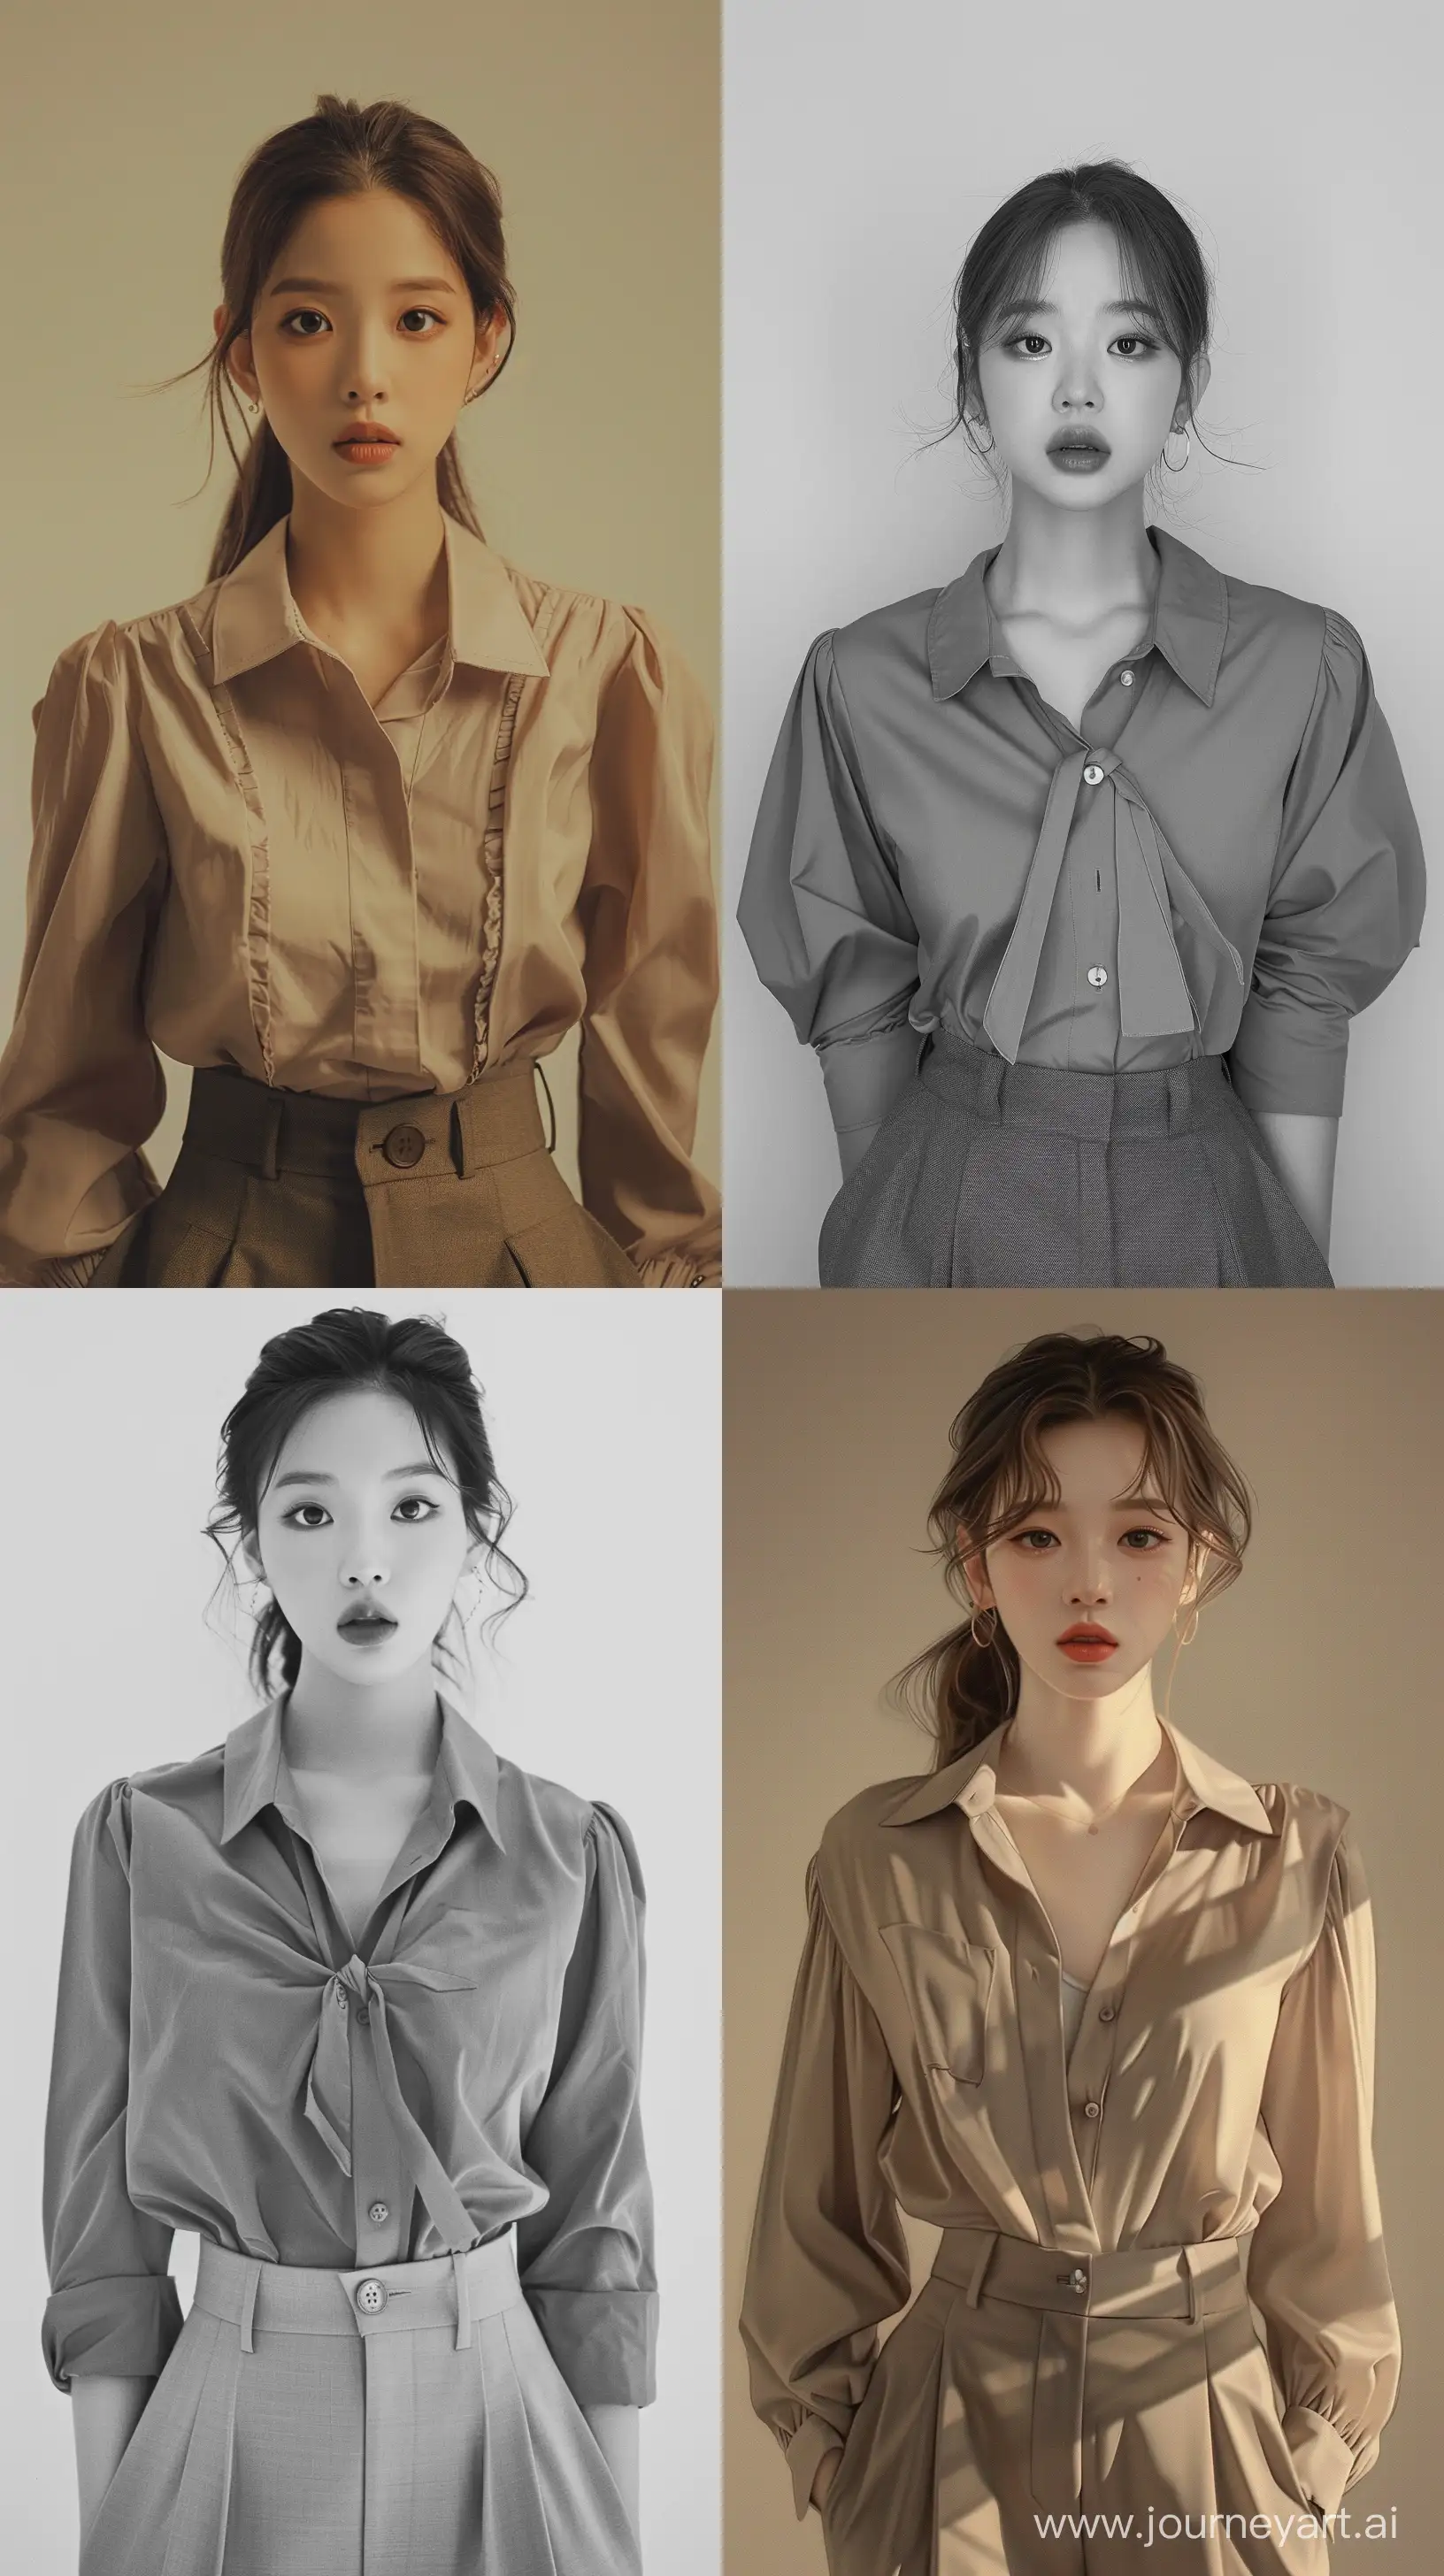 A beautiful Asian woman with wide-set eyes,wearing simple blouse and suit pants, youthful appearance, and facial features resembling Blackpink's Jennie. --ar 9:16 --v 6